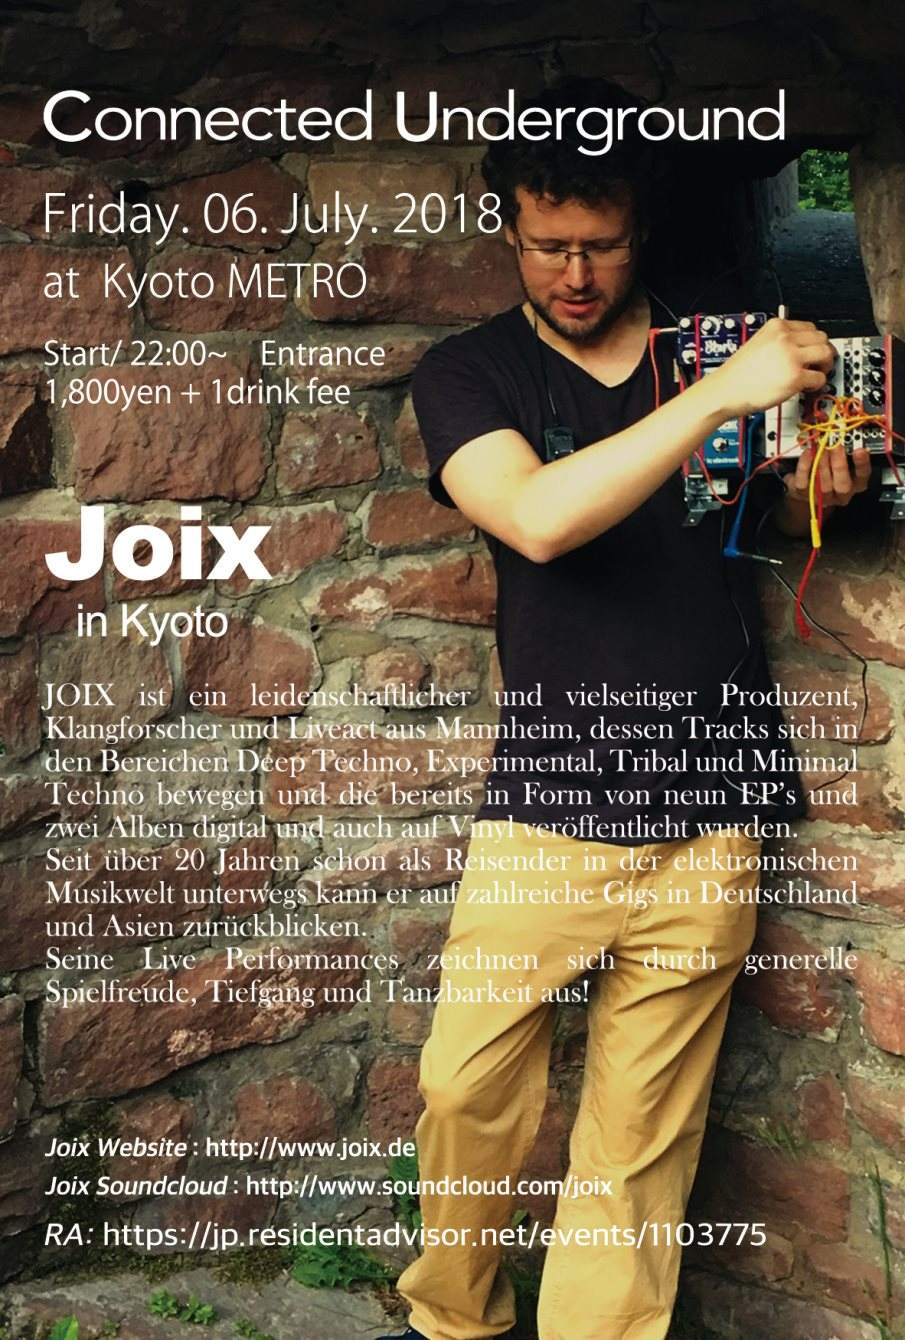 Connected Underground -Joix (Mannheim, Germany) in Kyoto- - Flyer front